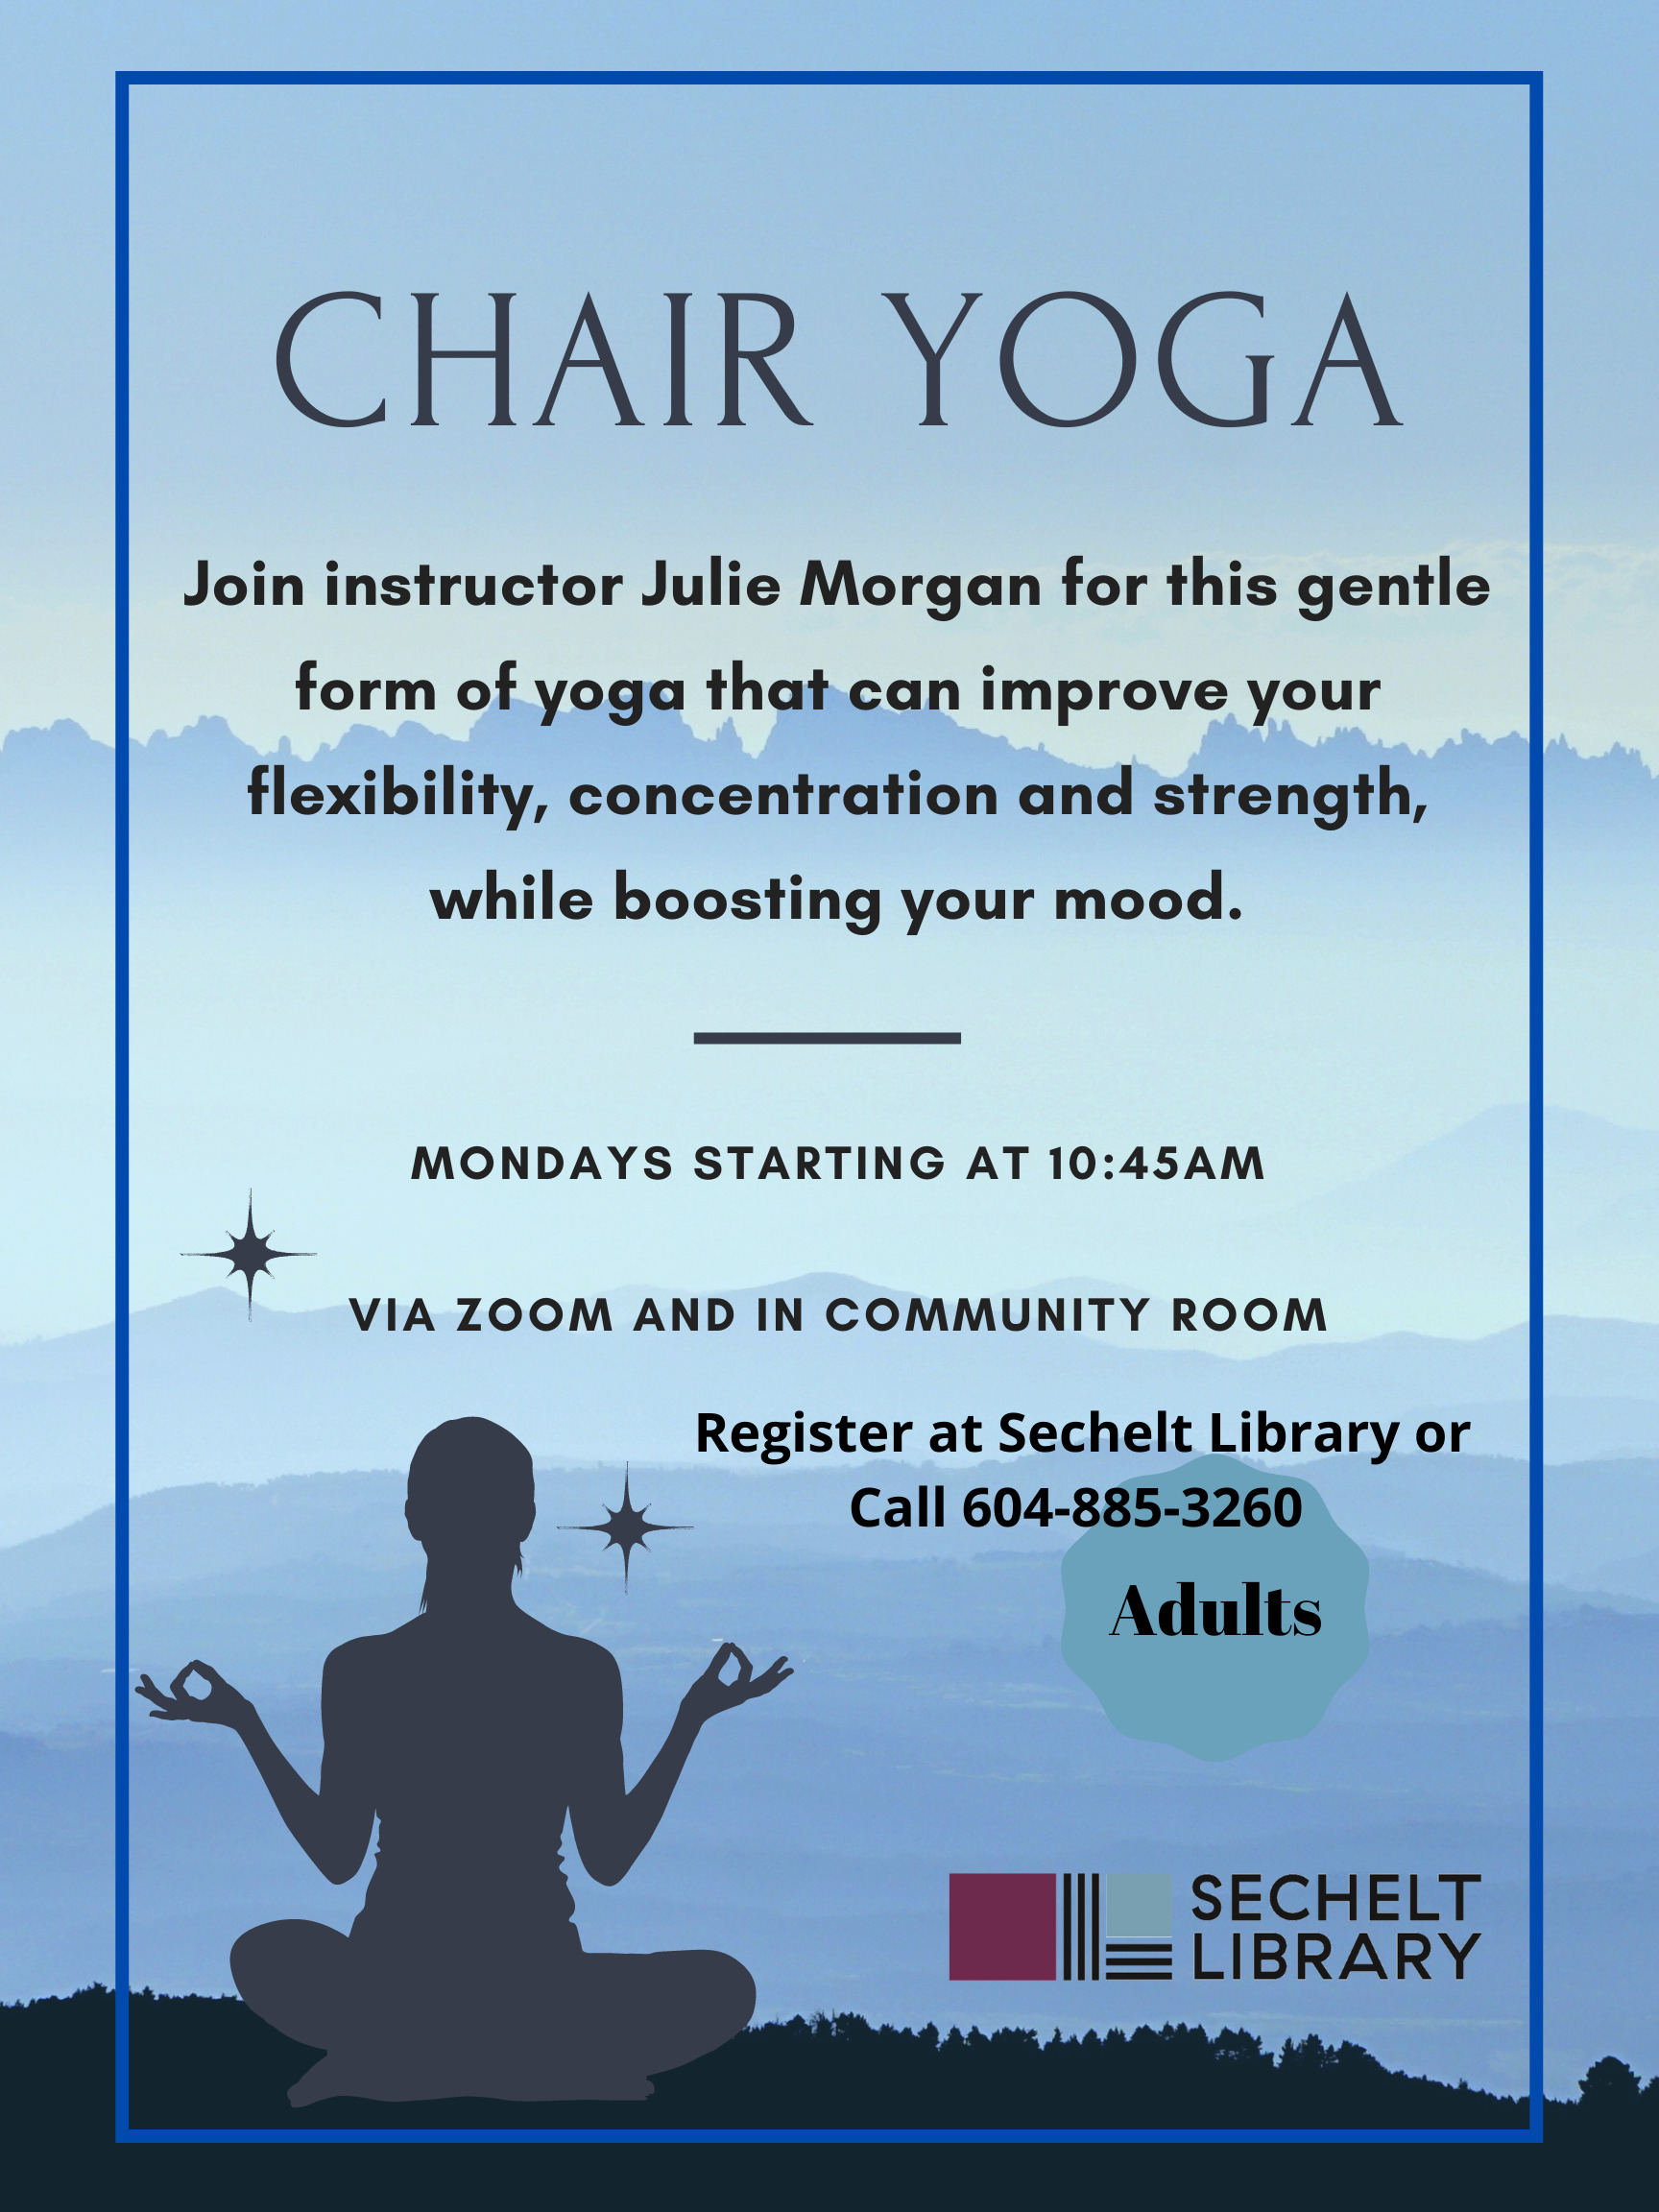 opens poster with details about Chair Yoga class on Mondays - April 4th, 11th, 25th 10:45-11:30 (No class April 18)